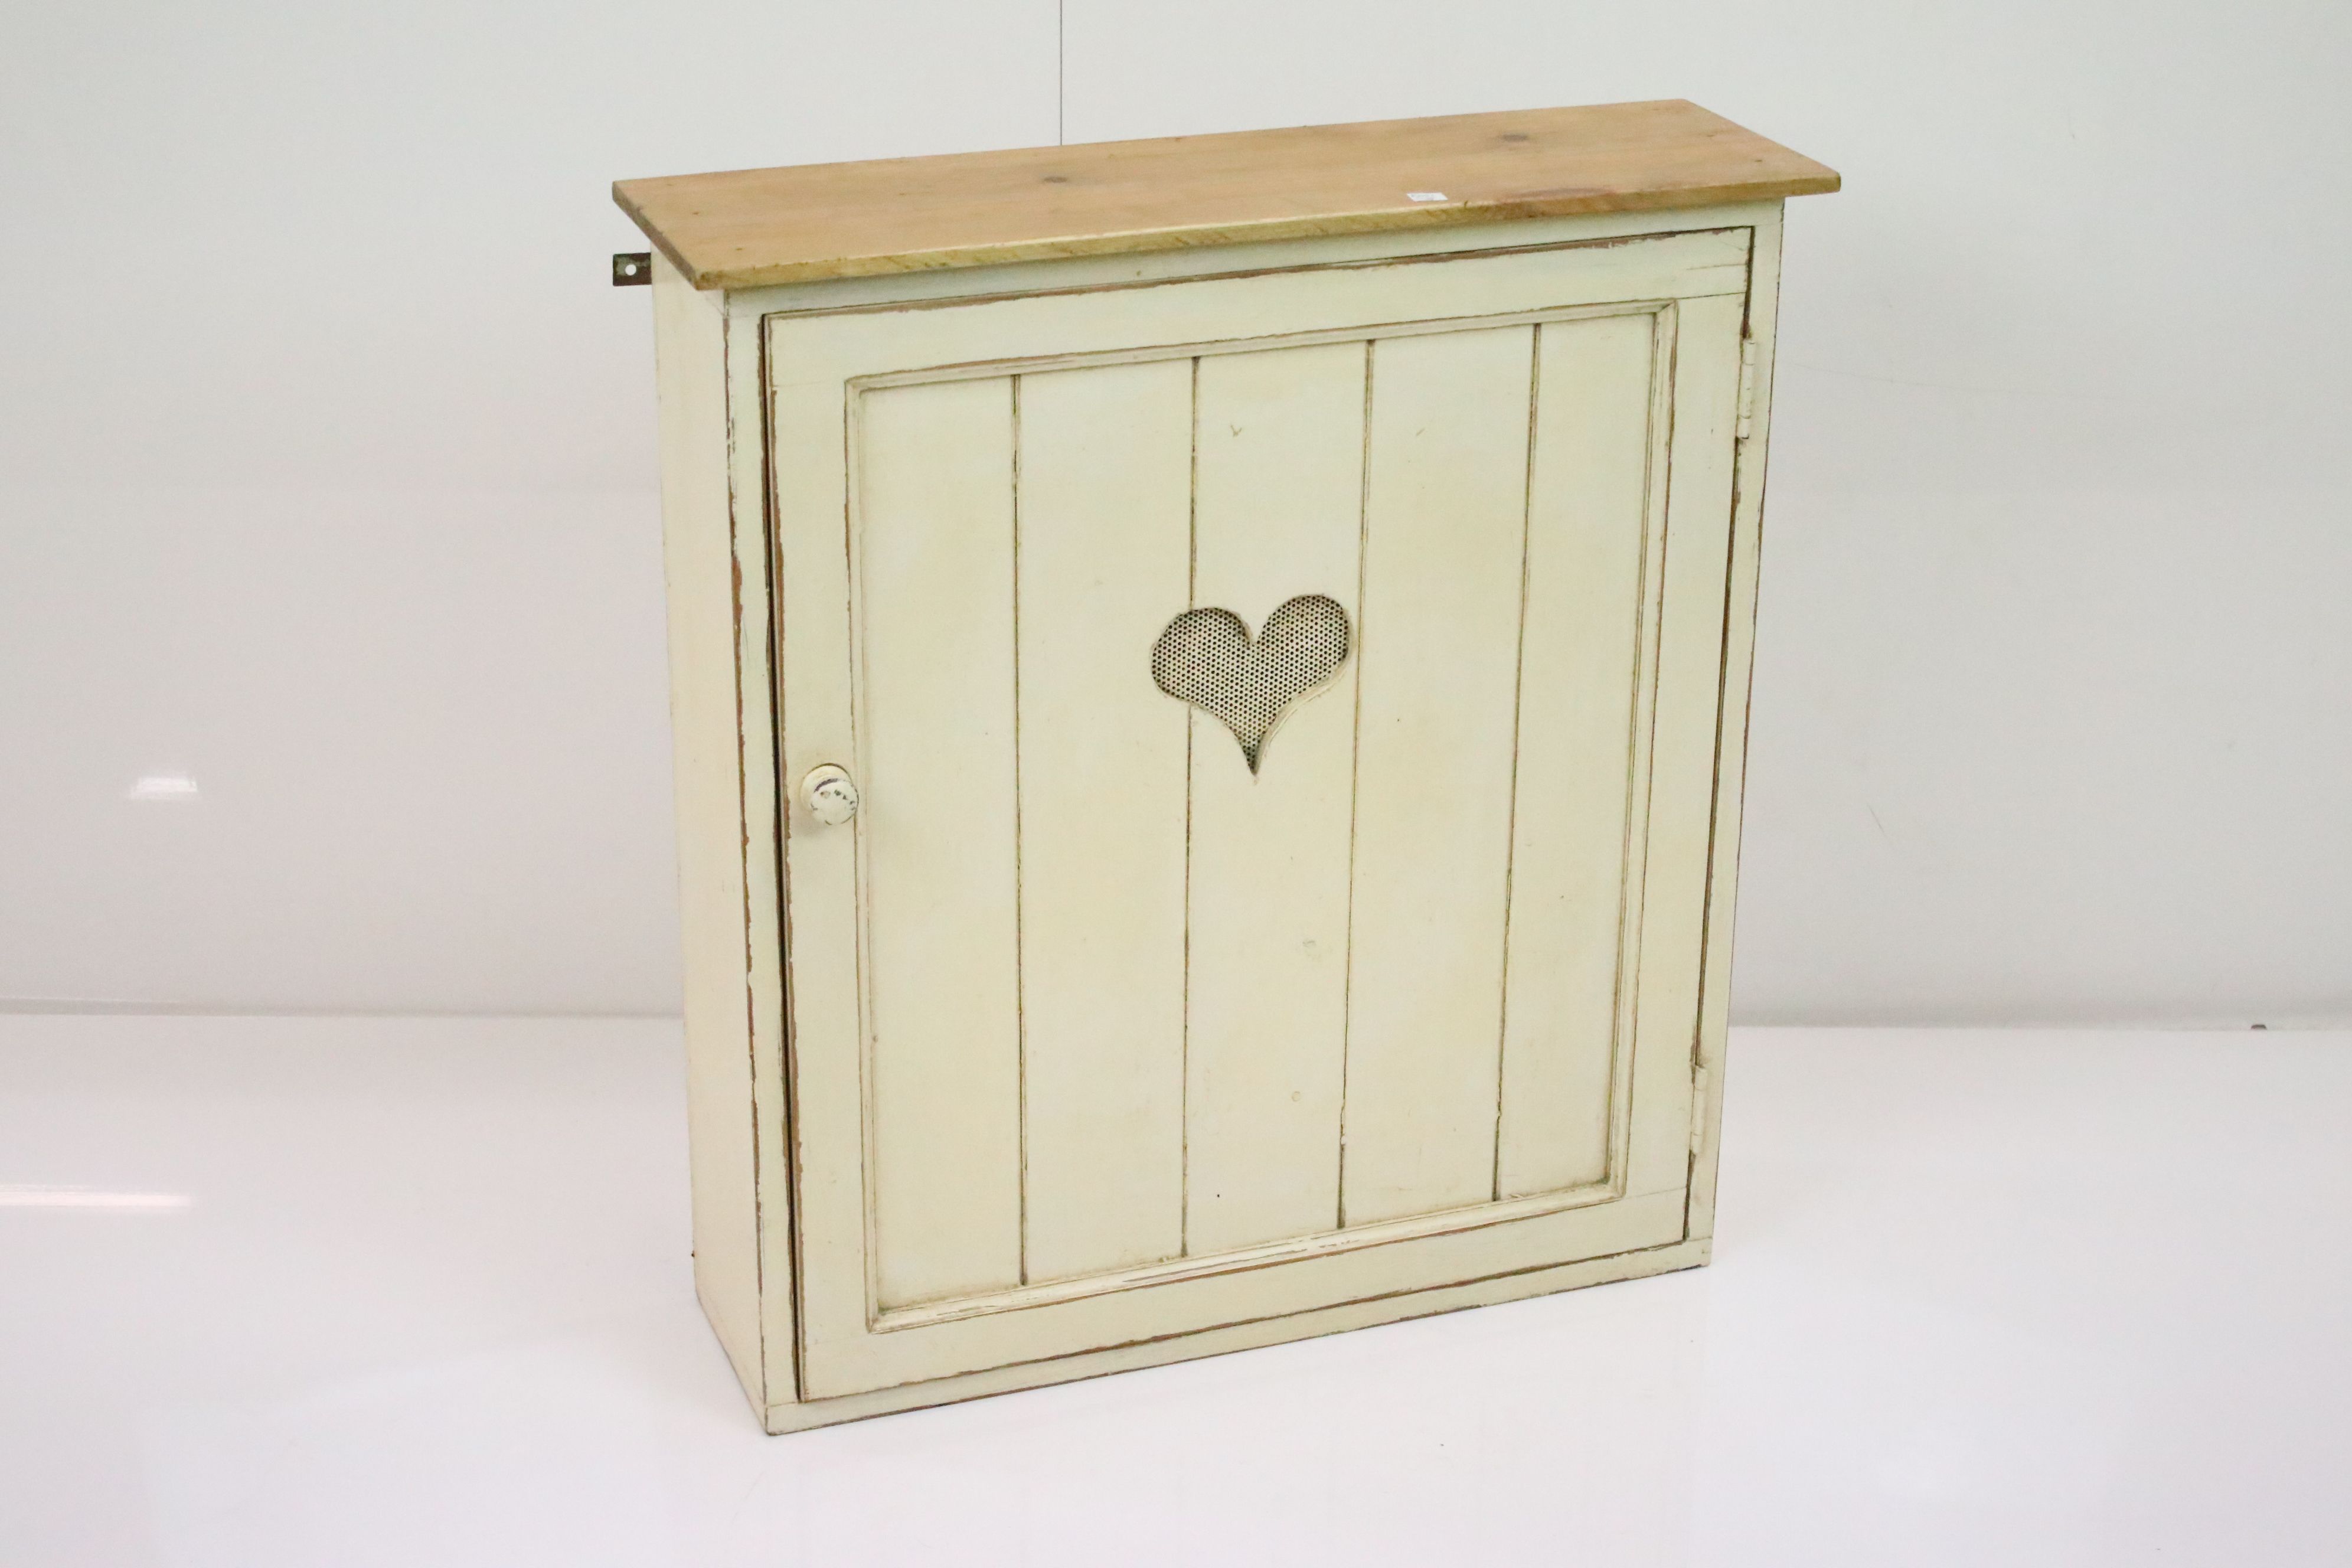 Painted Pine Wall Cupboard with pigeon hole interior, 57cm wide x 62cm high - Image 2 of 8